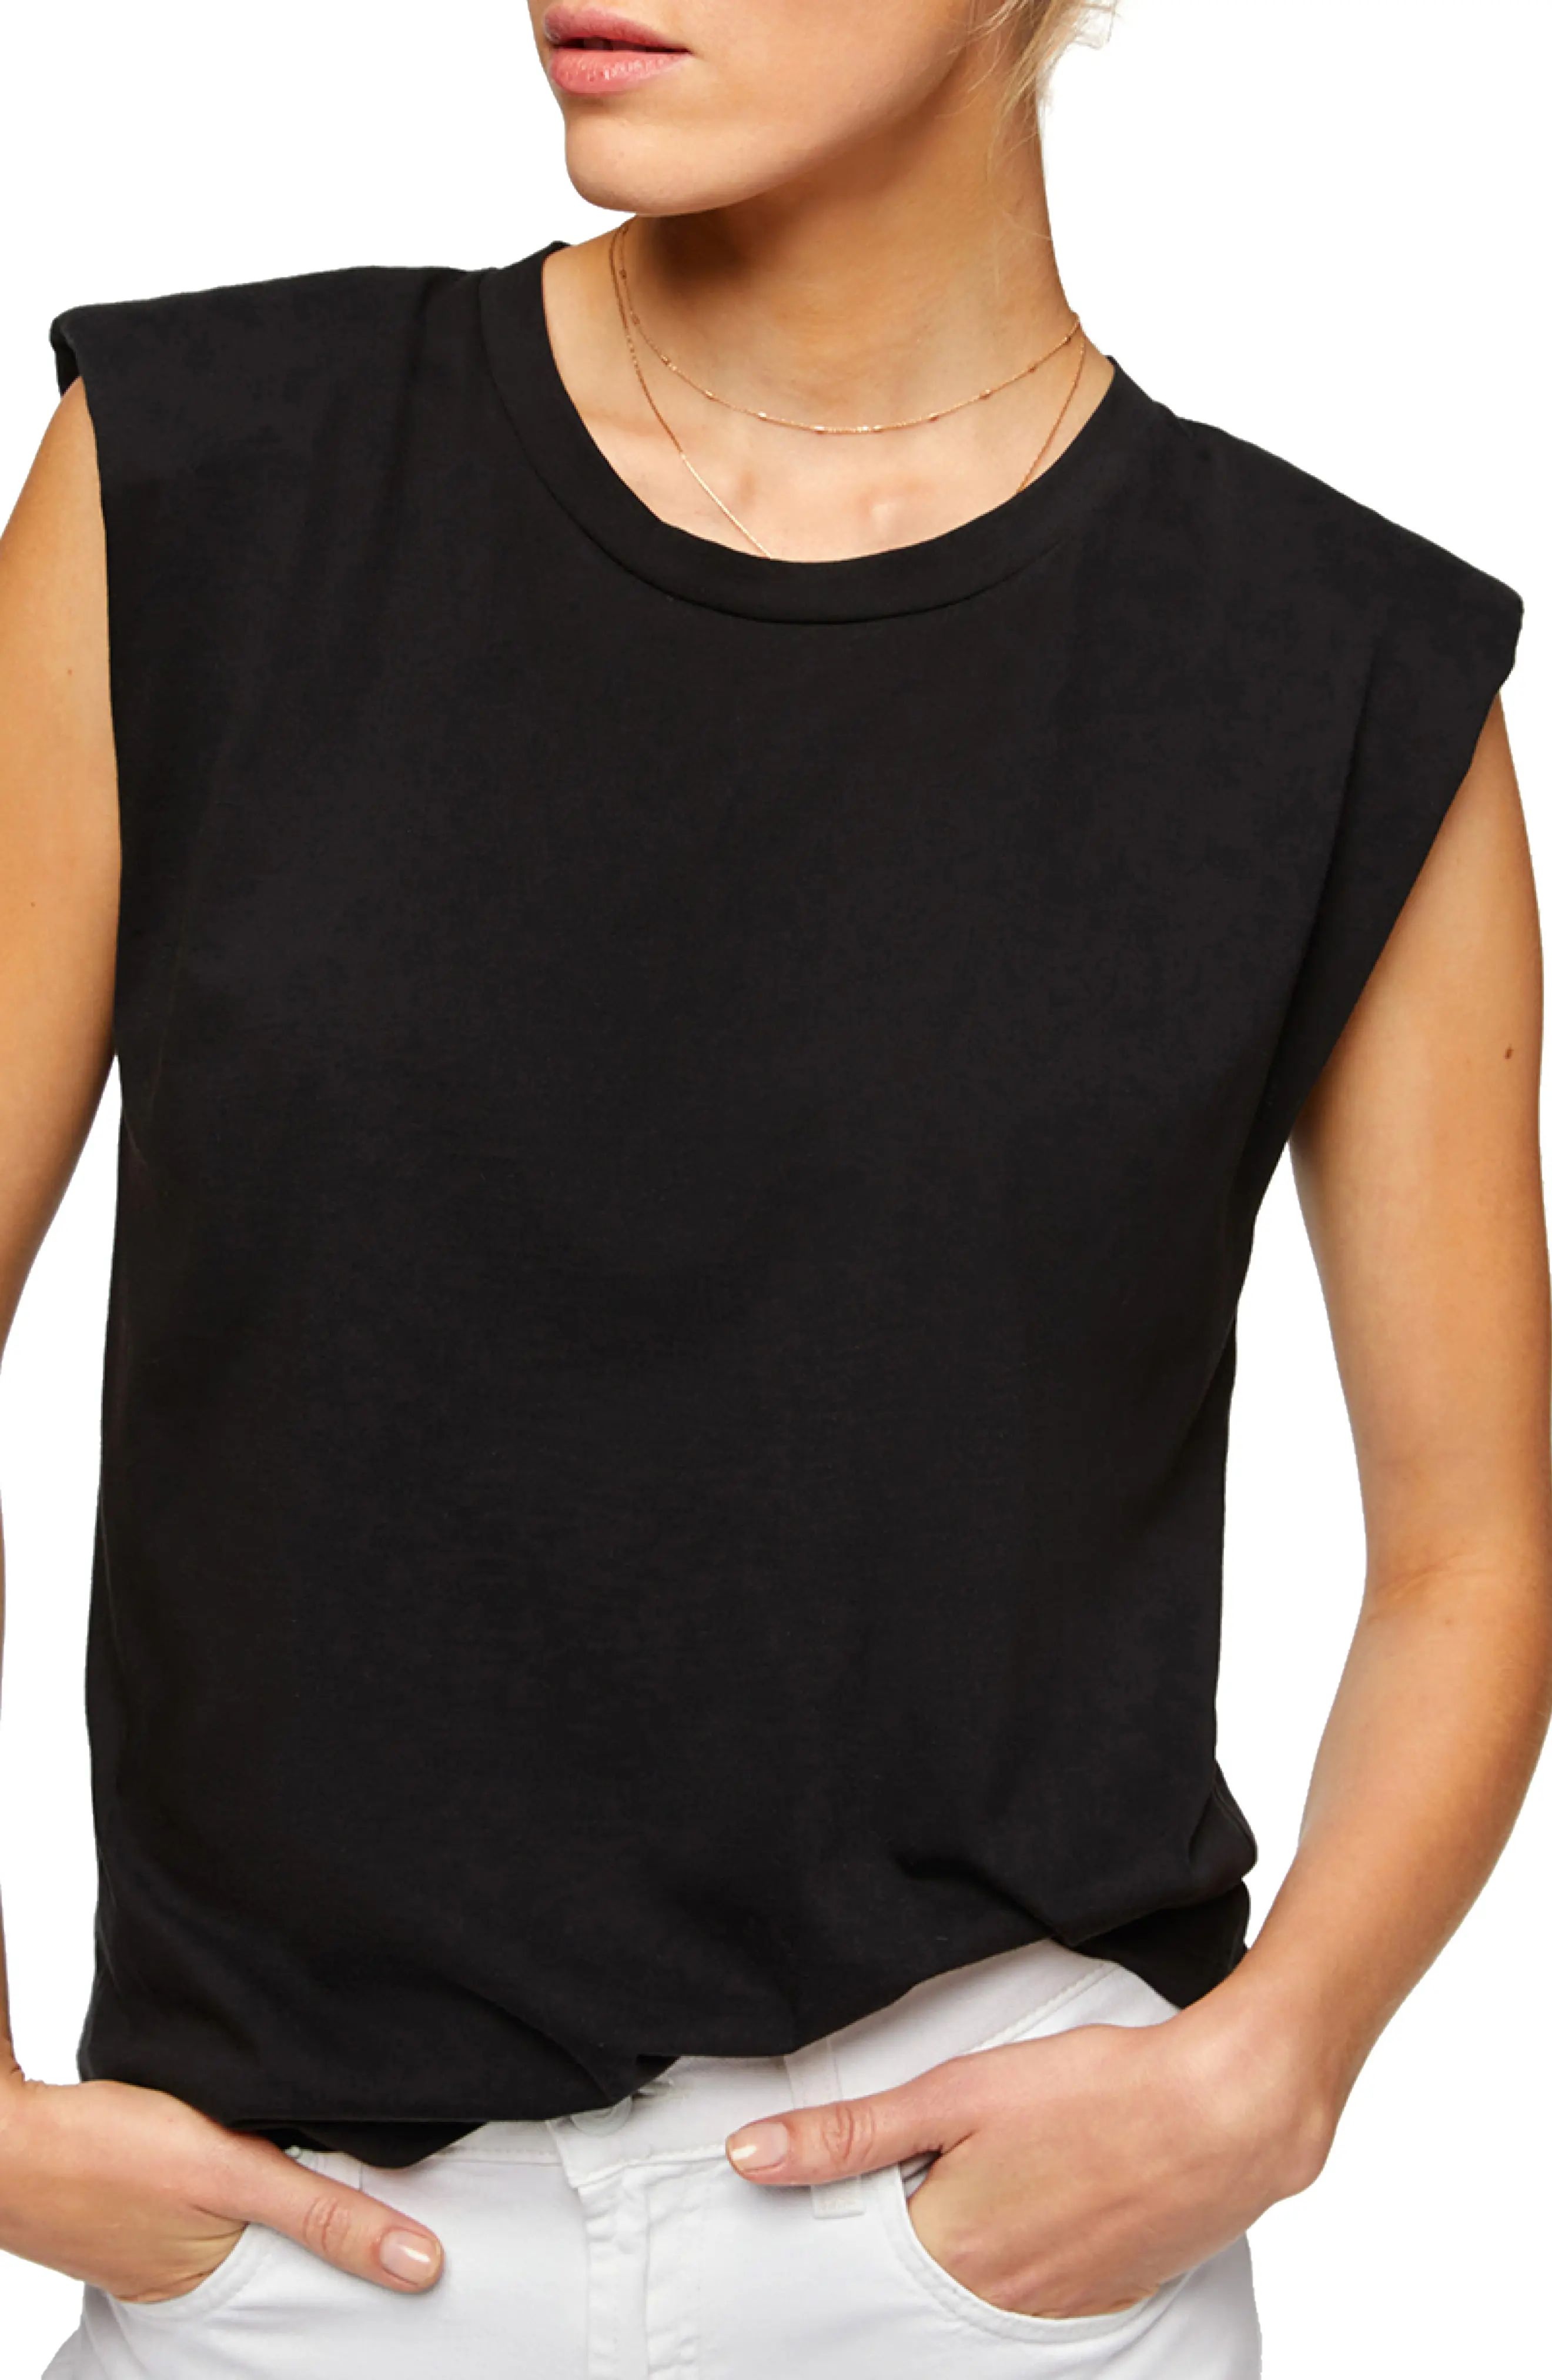 7 For All Mankind Pima Cotton Muscle T-Shirt, Size Medium in Black at Nordstrom | Nordstrom